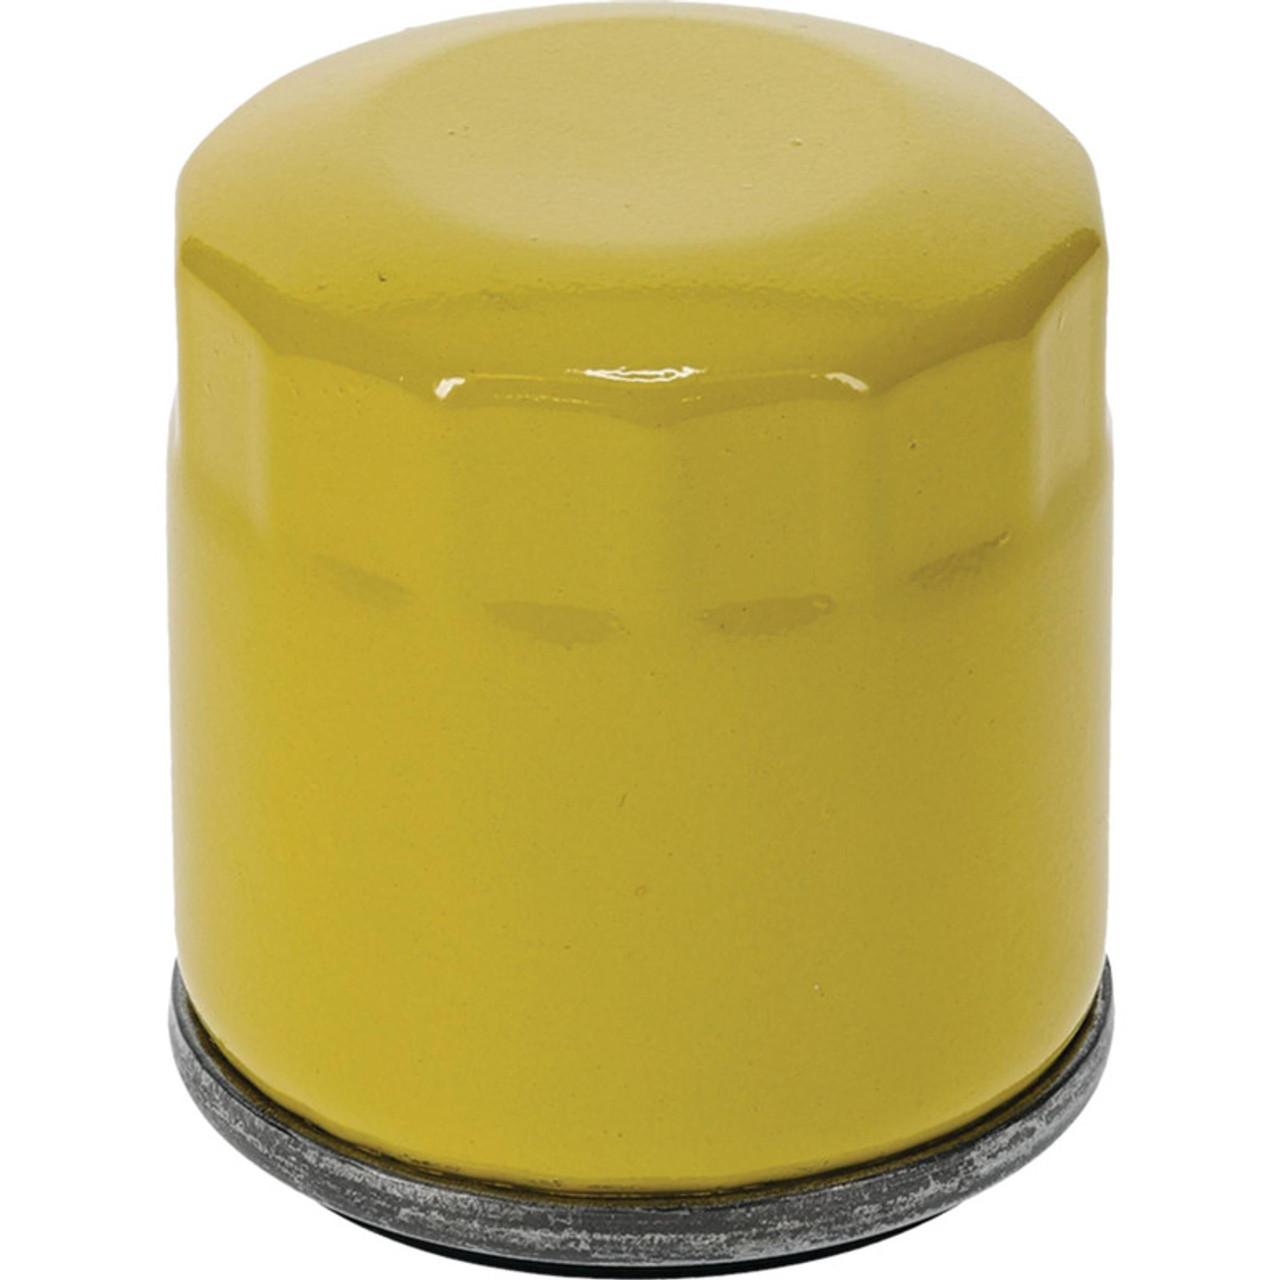 Oil Filter for Briggs and Stratton 795990, 121Q, 121S engines &